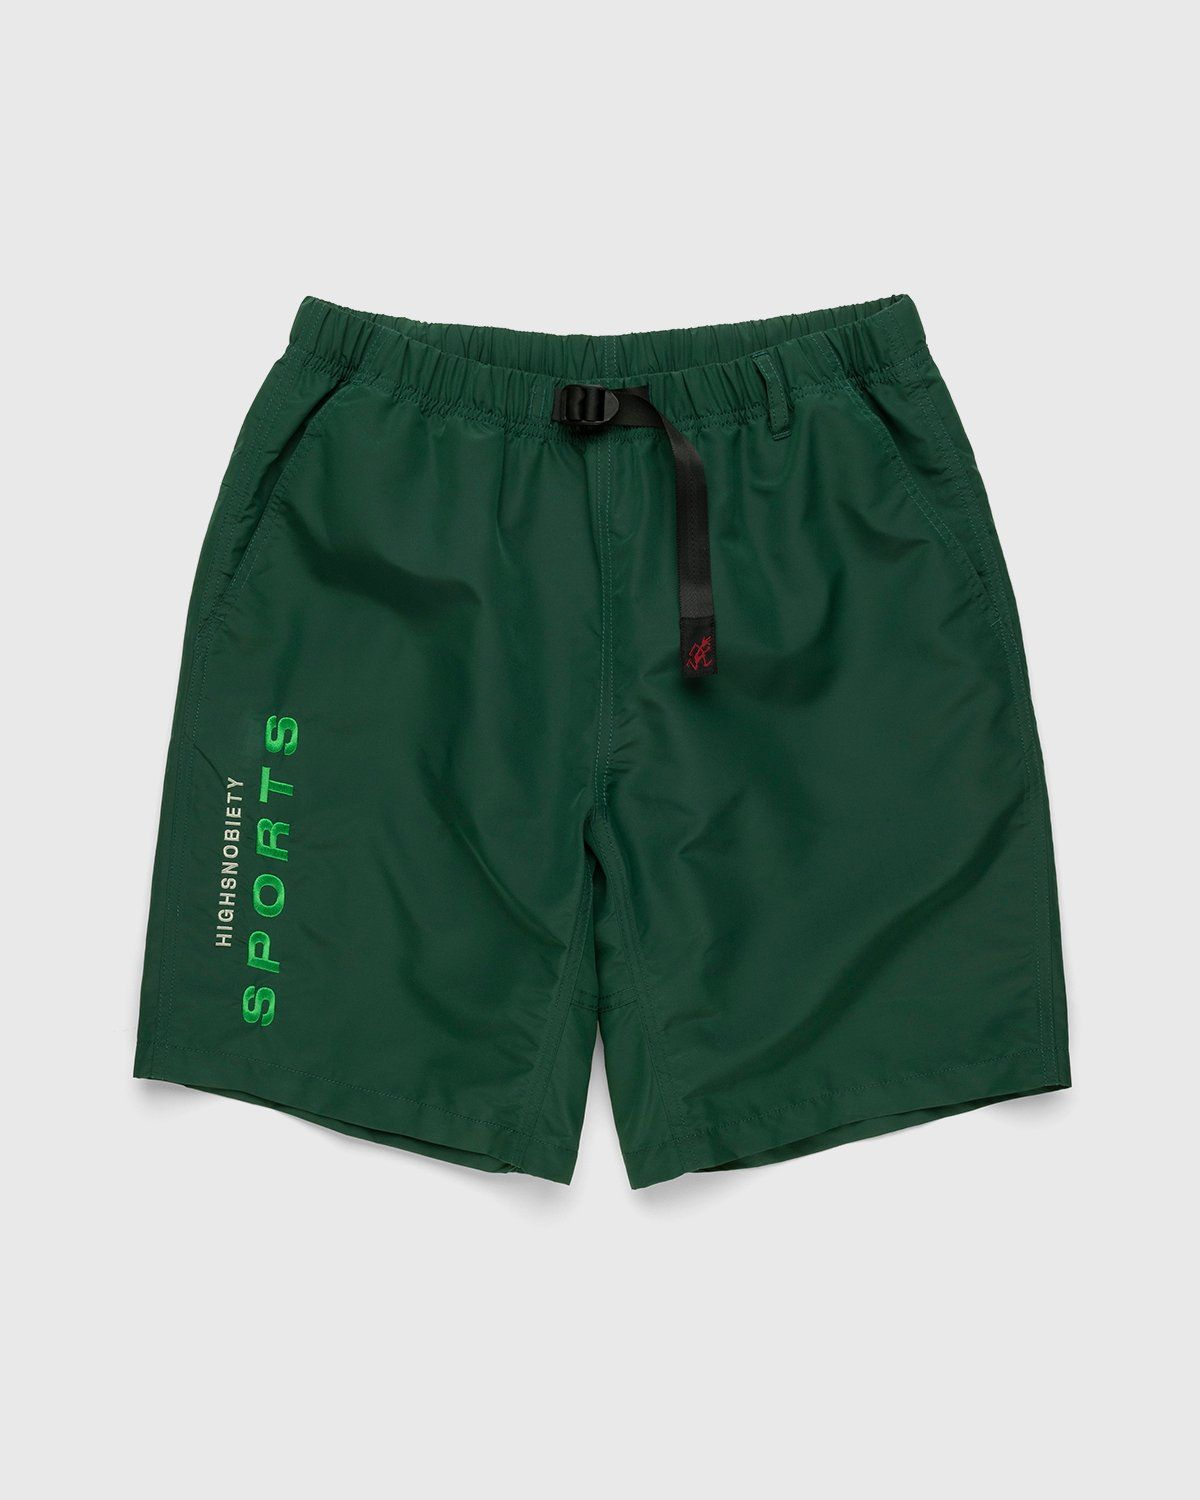 Gramicci x Highsnobiety – HS Sports Shell Packable Shorts Forest Green - Shorts - Green - Image 1